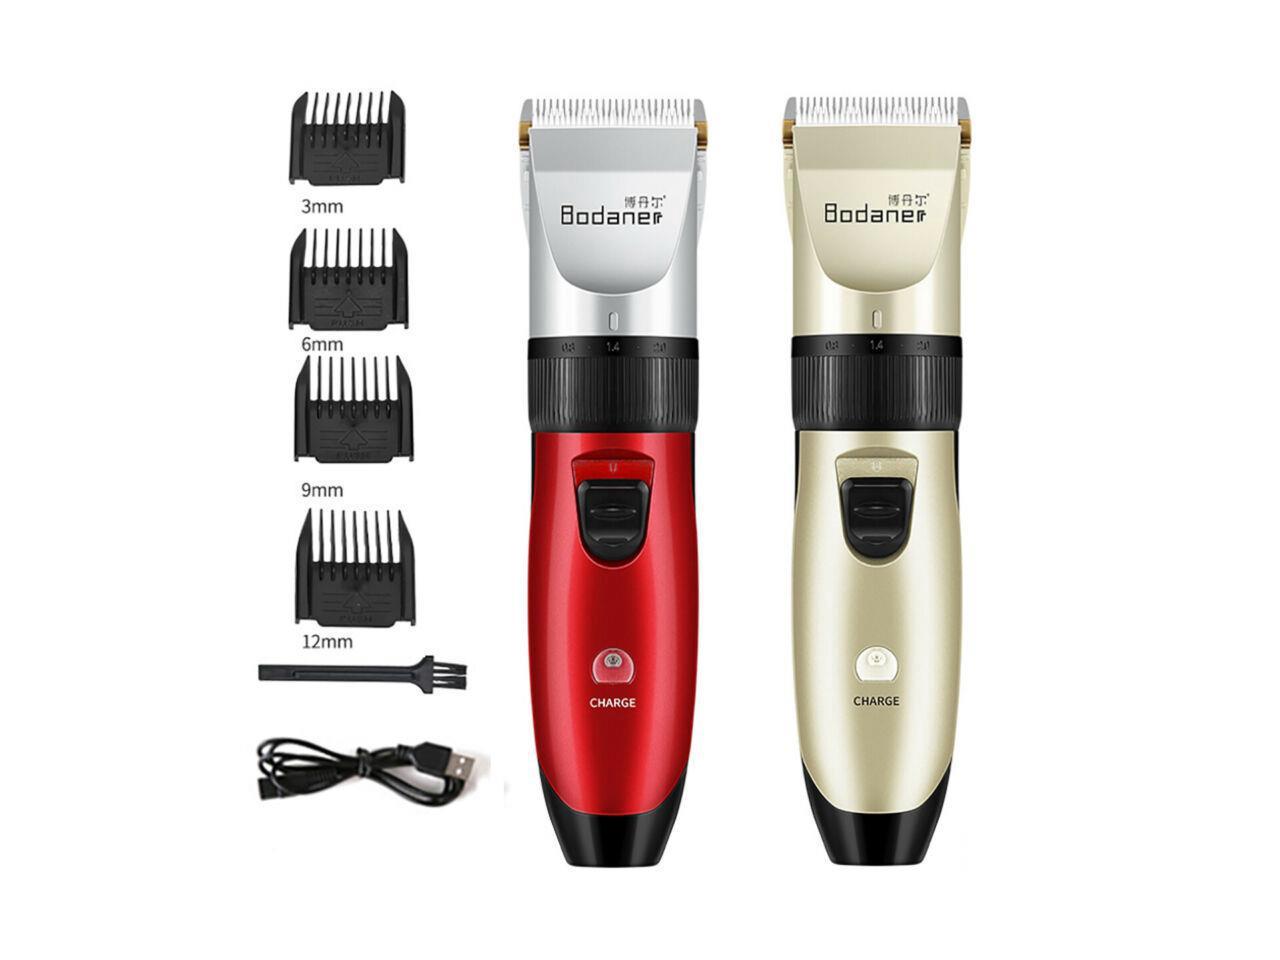 electric shaver for haircut